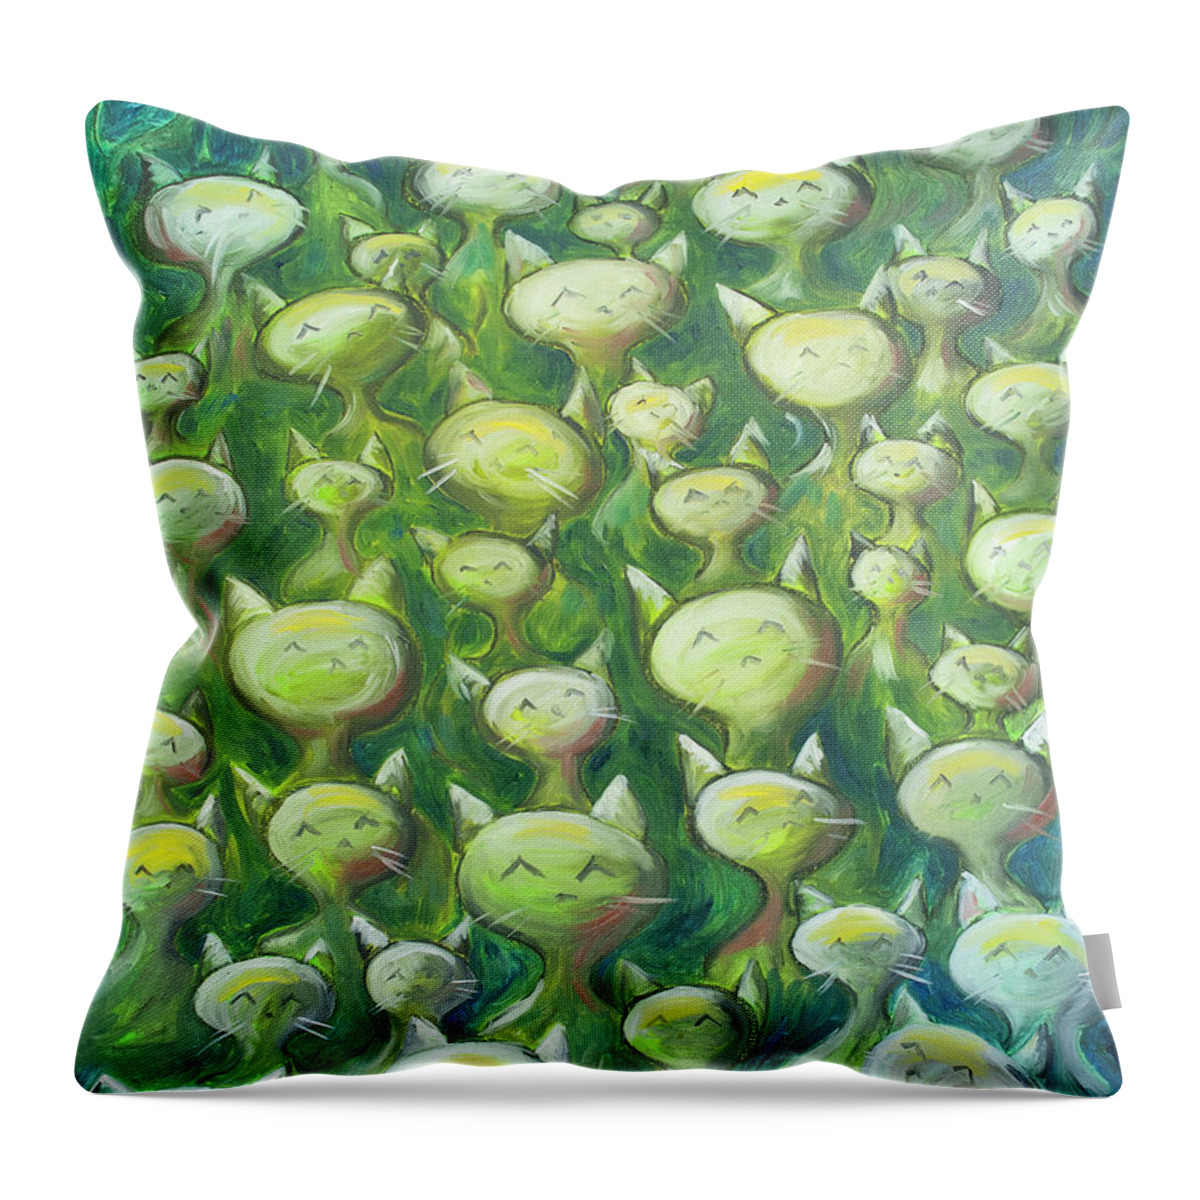 Cats Throw Pillow featuring the painting Field Of Cats by Nik Helbig